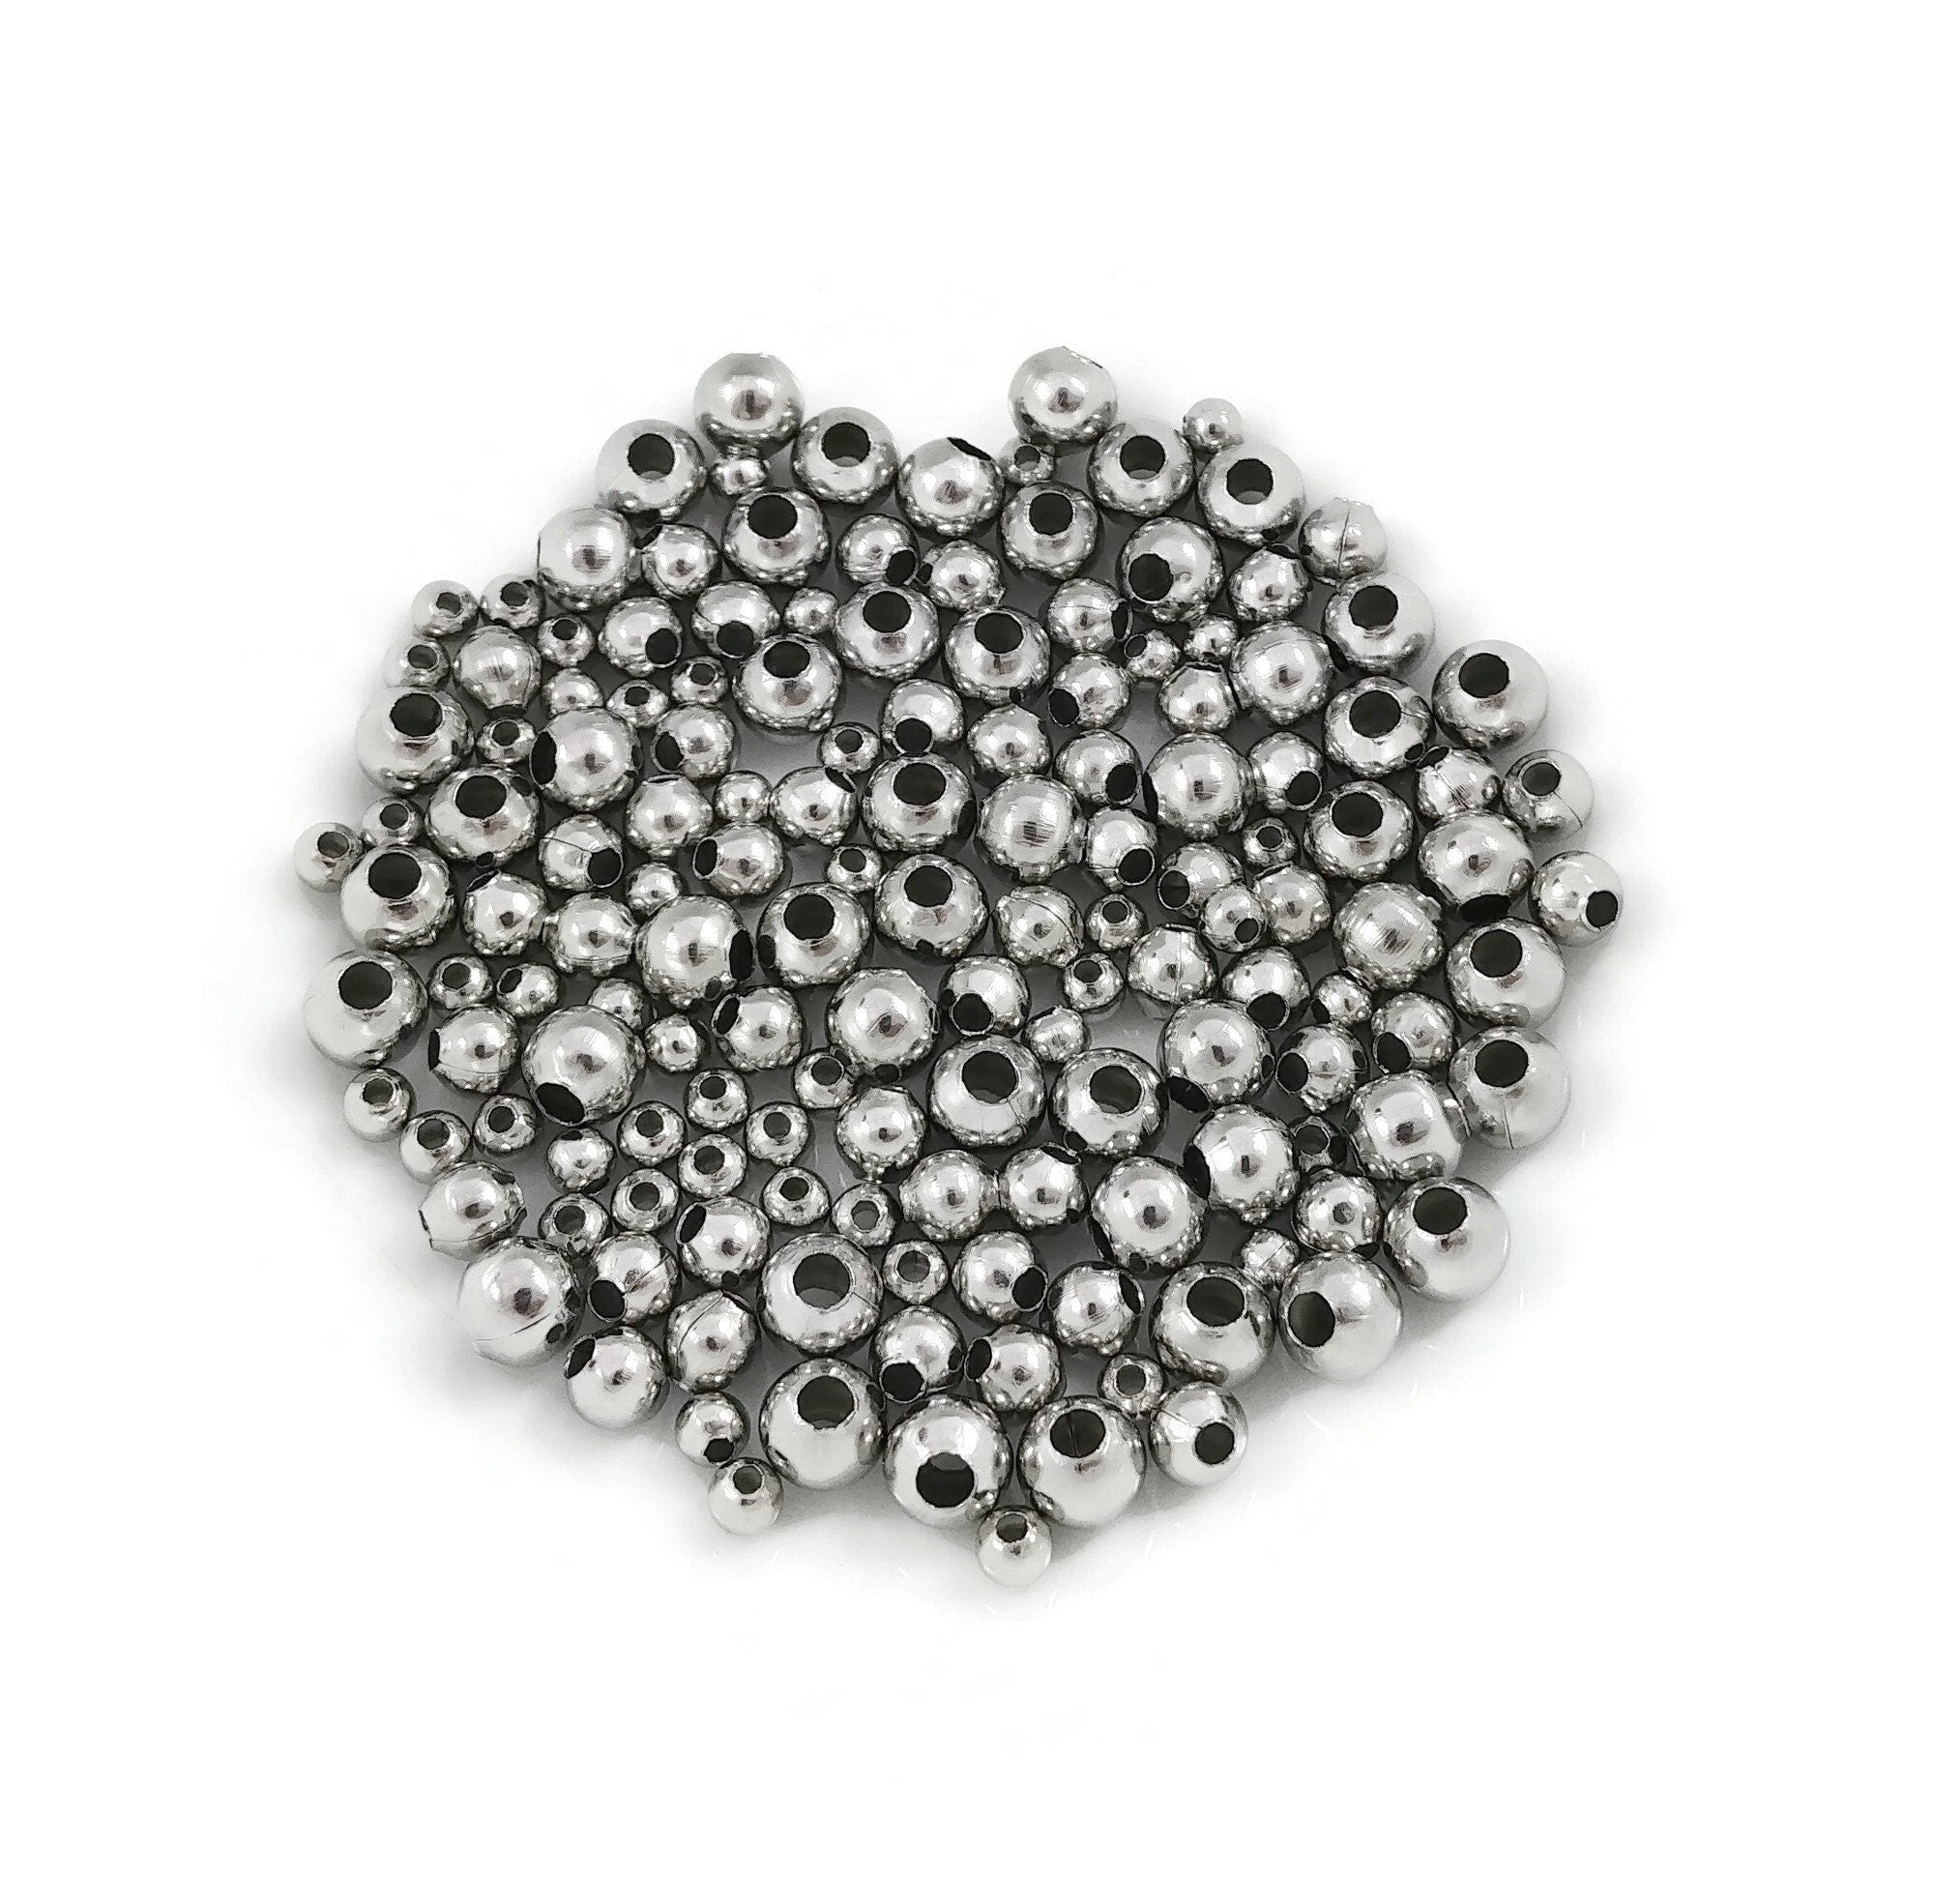 200pcs 5mm Rondelle Spacer Beads Stainless Steel Loose Beads Metal Small Hole Spacer Beads Smooth Surface Beads Finding for DIY Bracelet Necklace